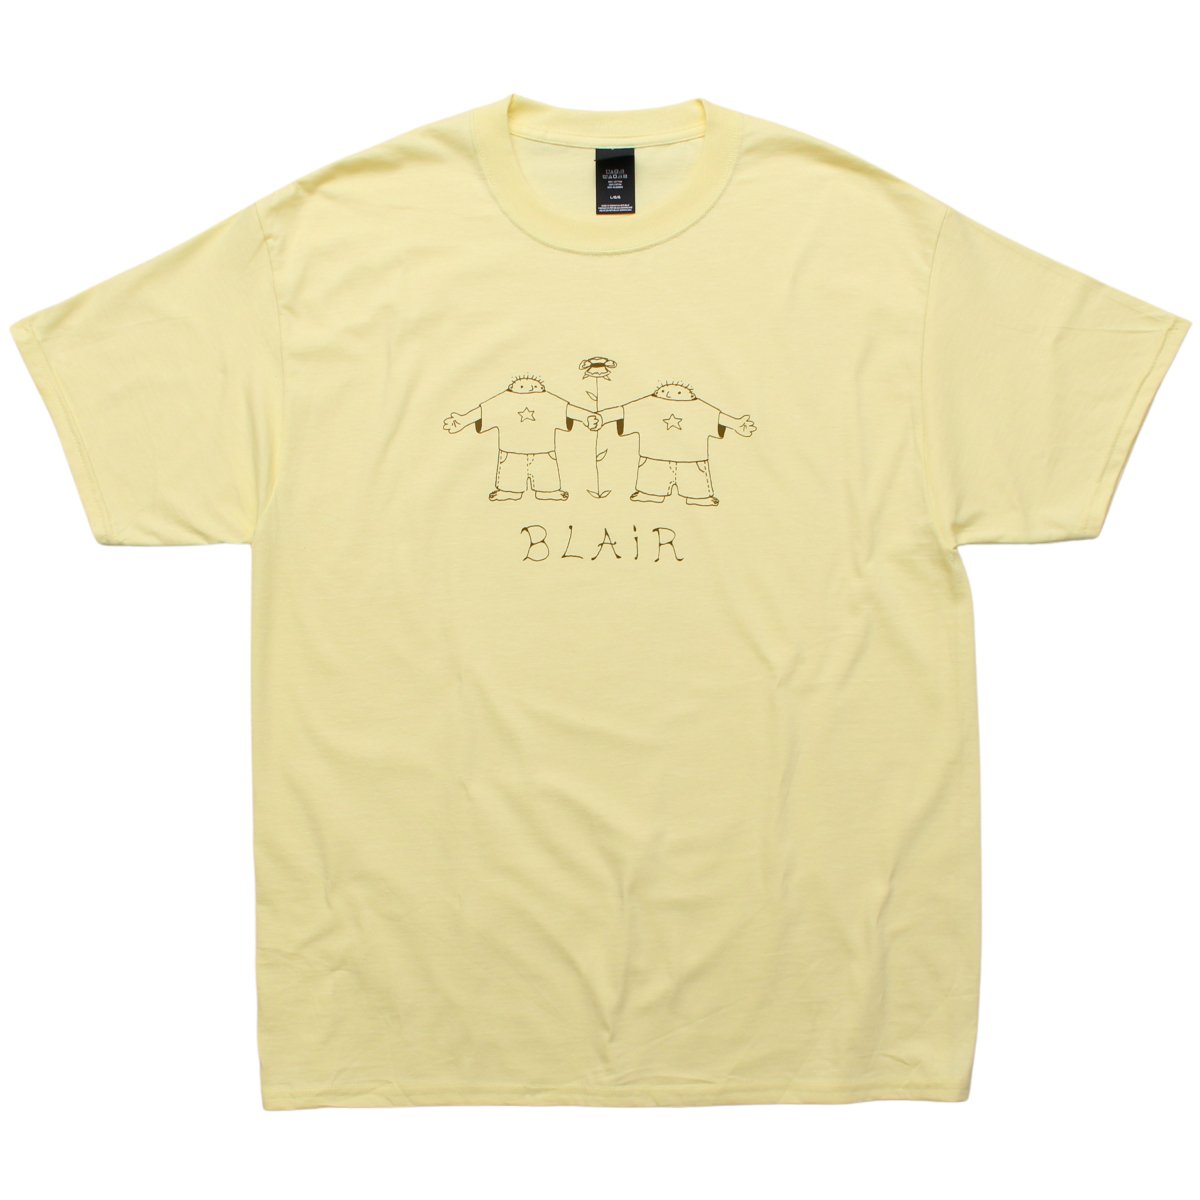 Blair graphic s/s tee【BUTTER】